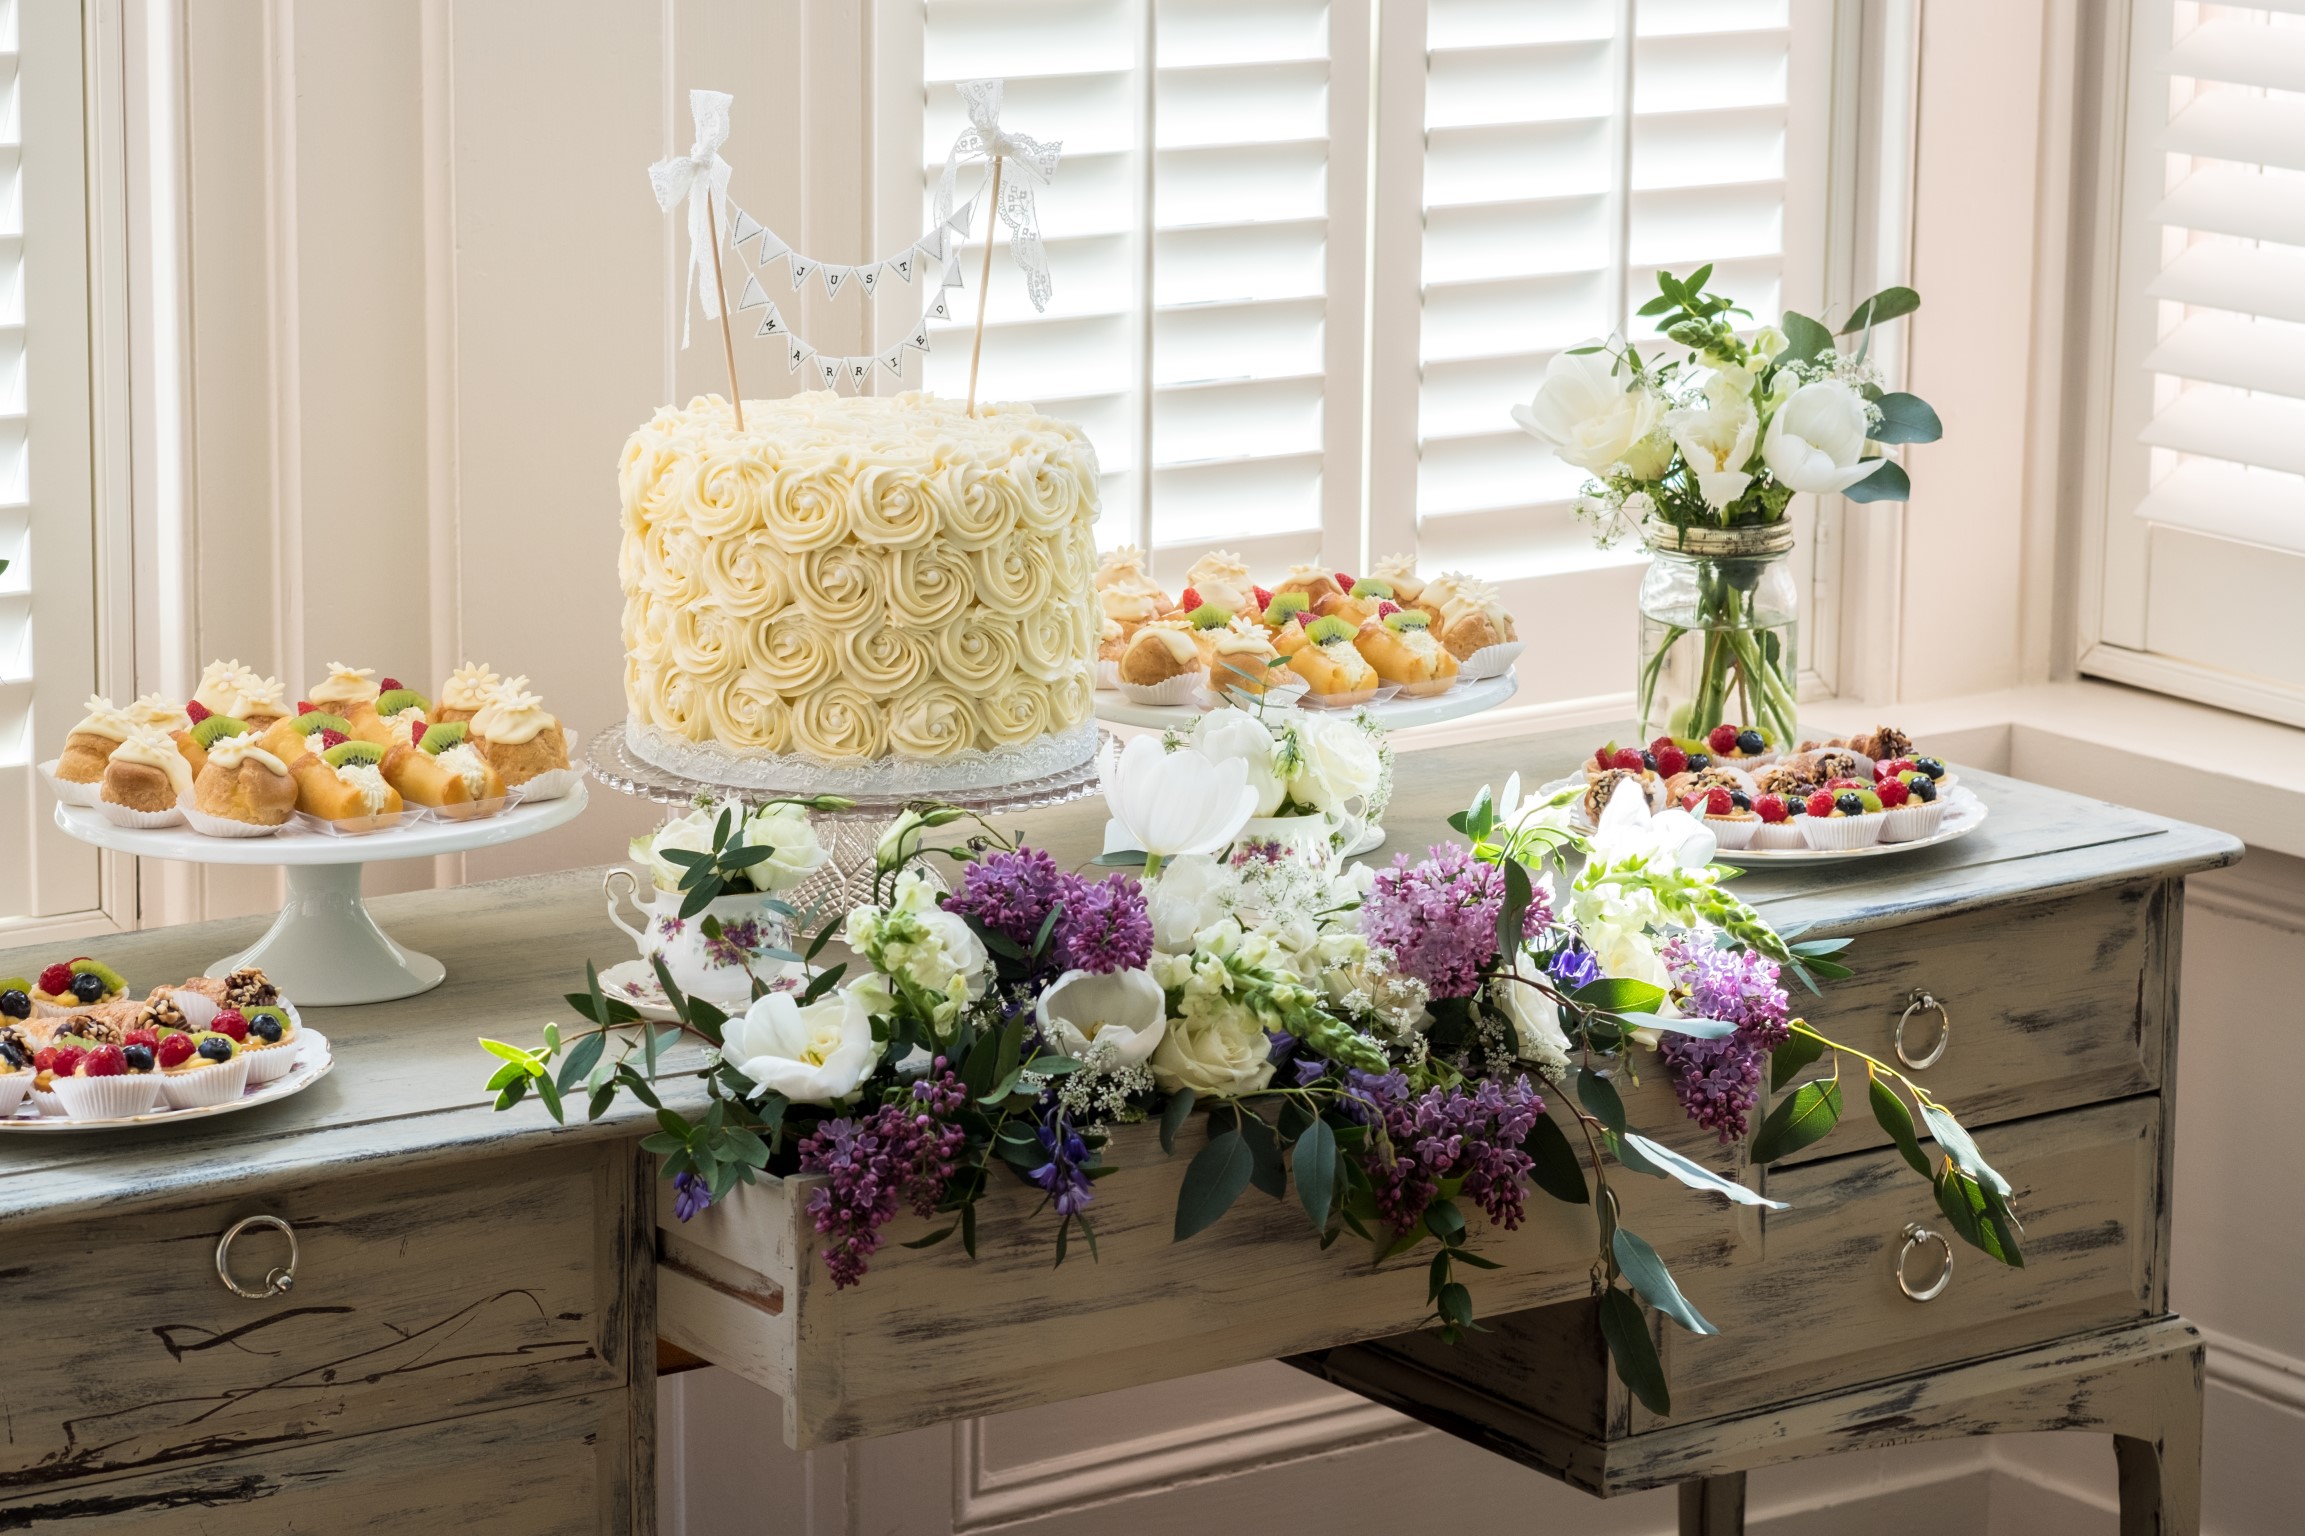 How To Rock A Wedding Dessert Table The Italian Way ⋆